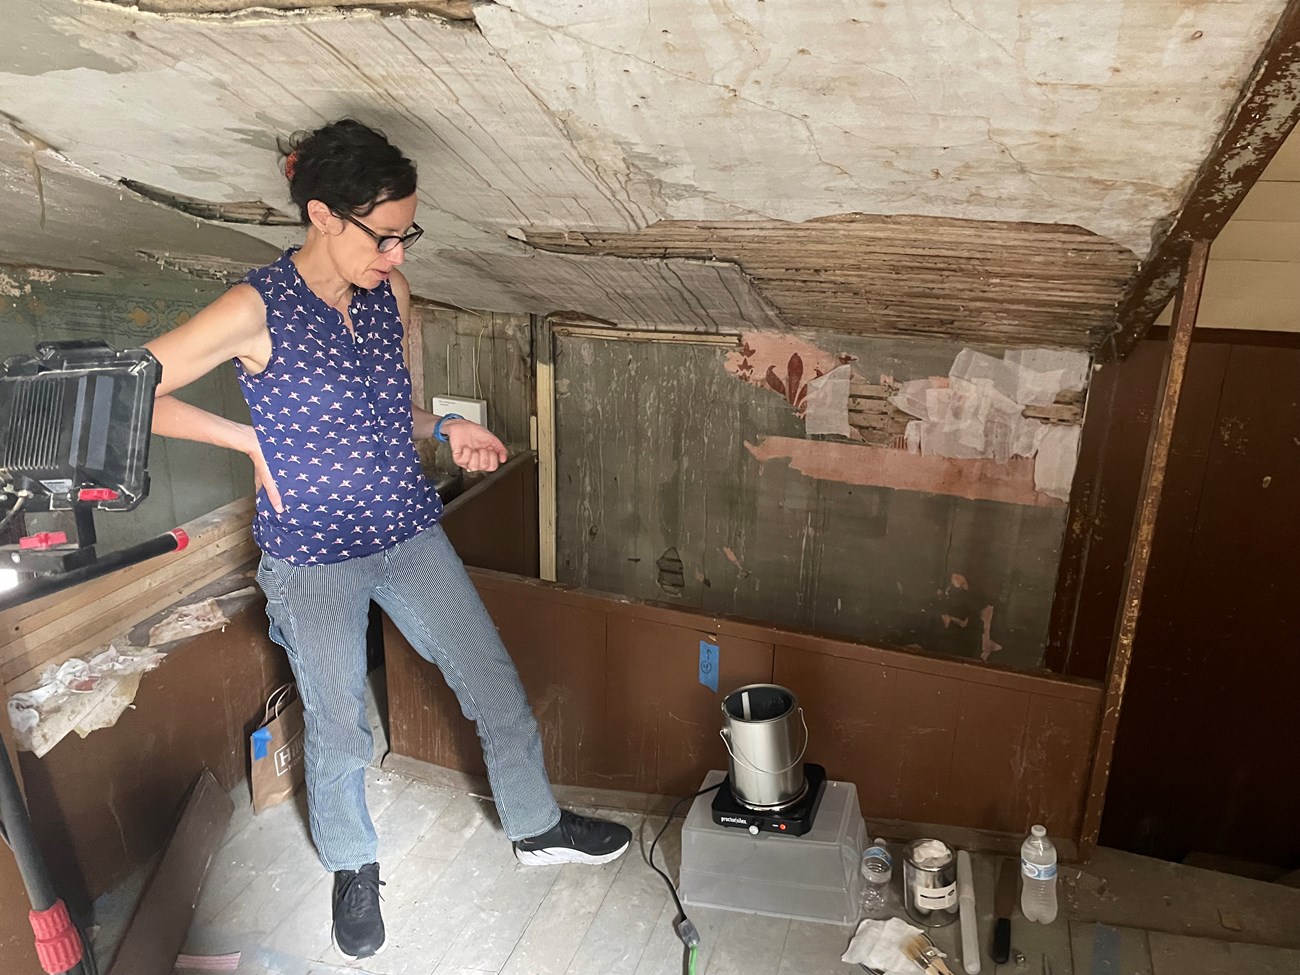 An NPS conservator prepares materials to remove historic plaster and stenciling, visibly crumbling on the wall behind her.